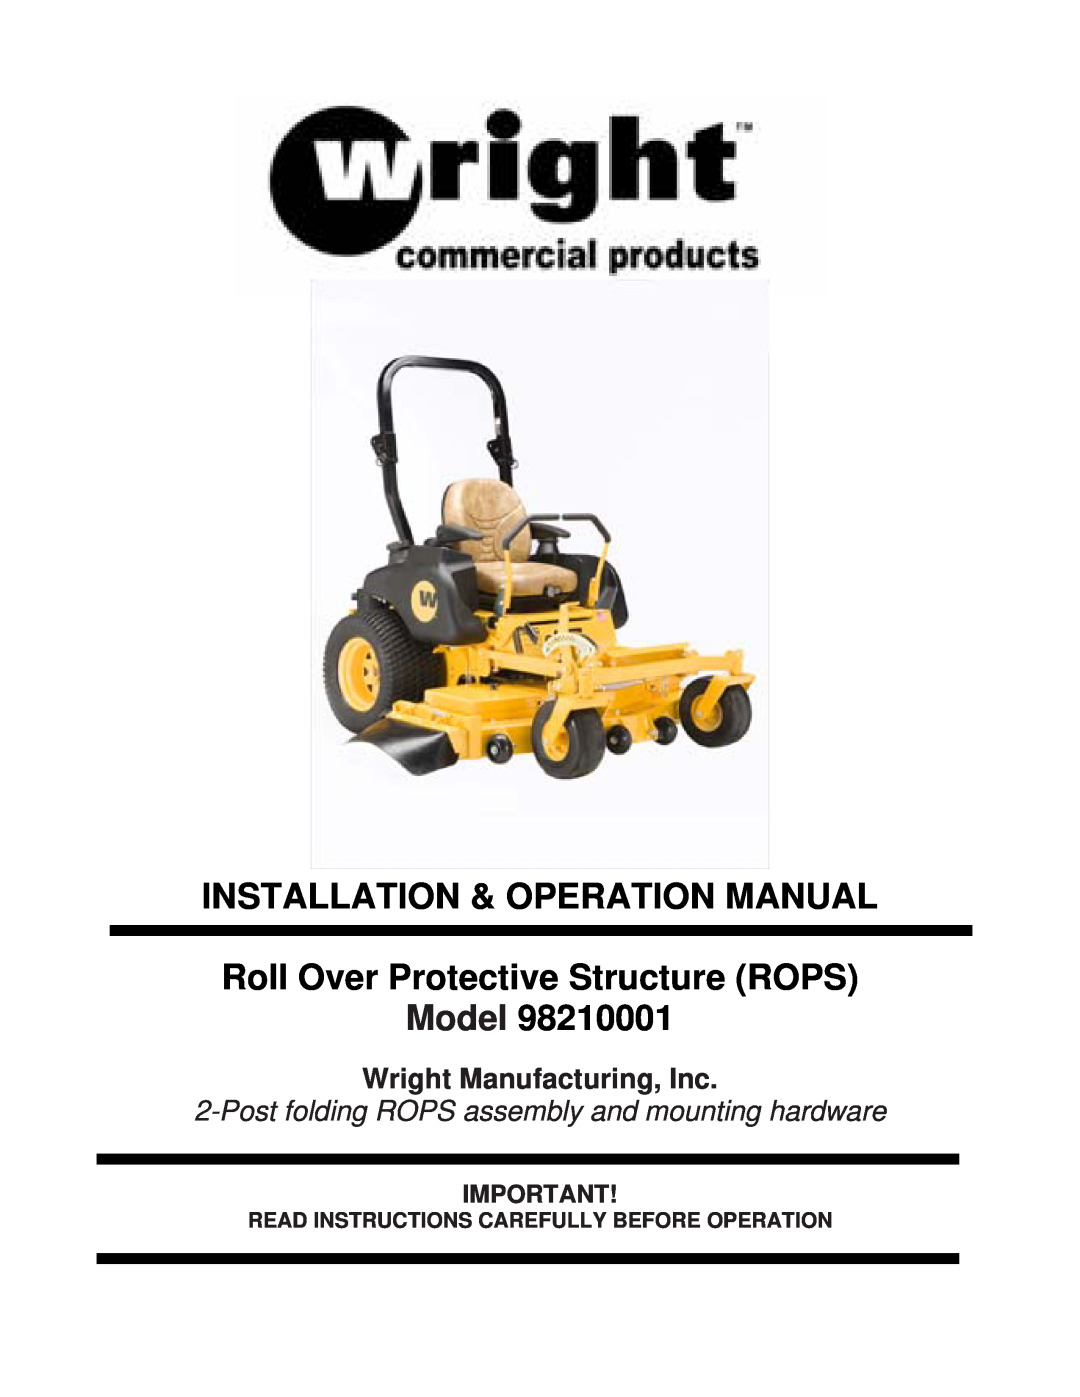 Wright Manufacturing 98210001 operation manual Roll Over Protective Structure ROPS Model, Wright Manufacturing, Inc 